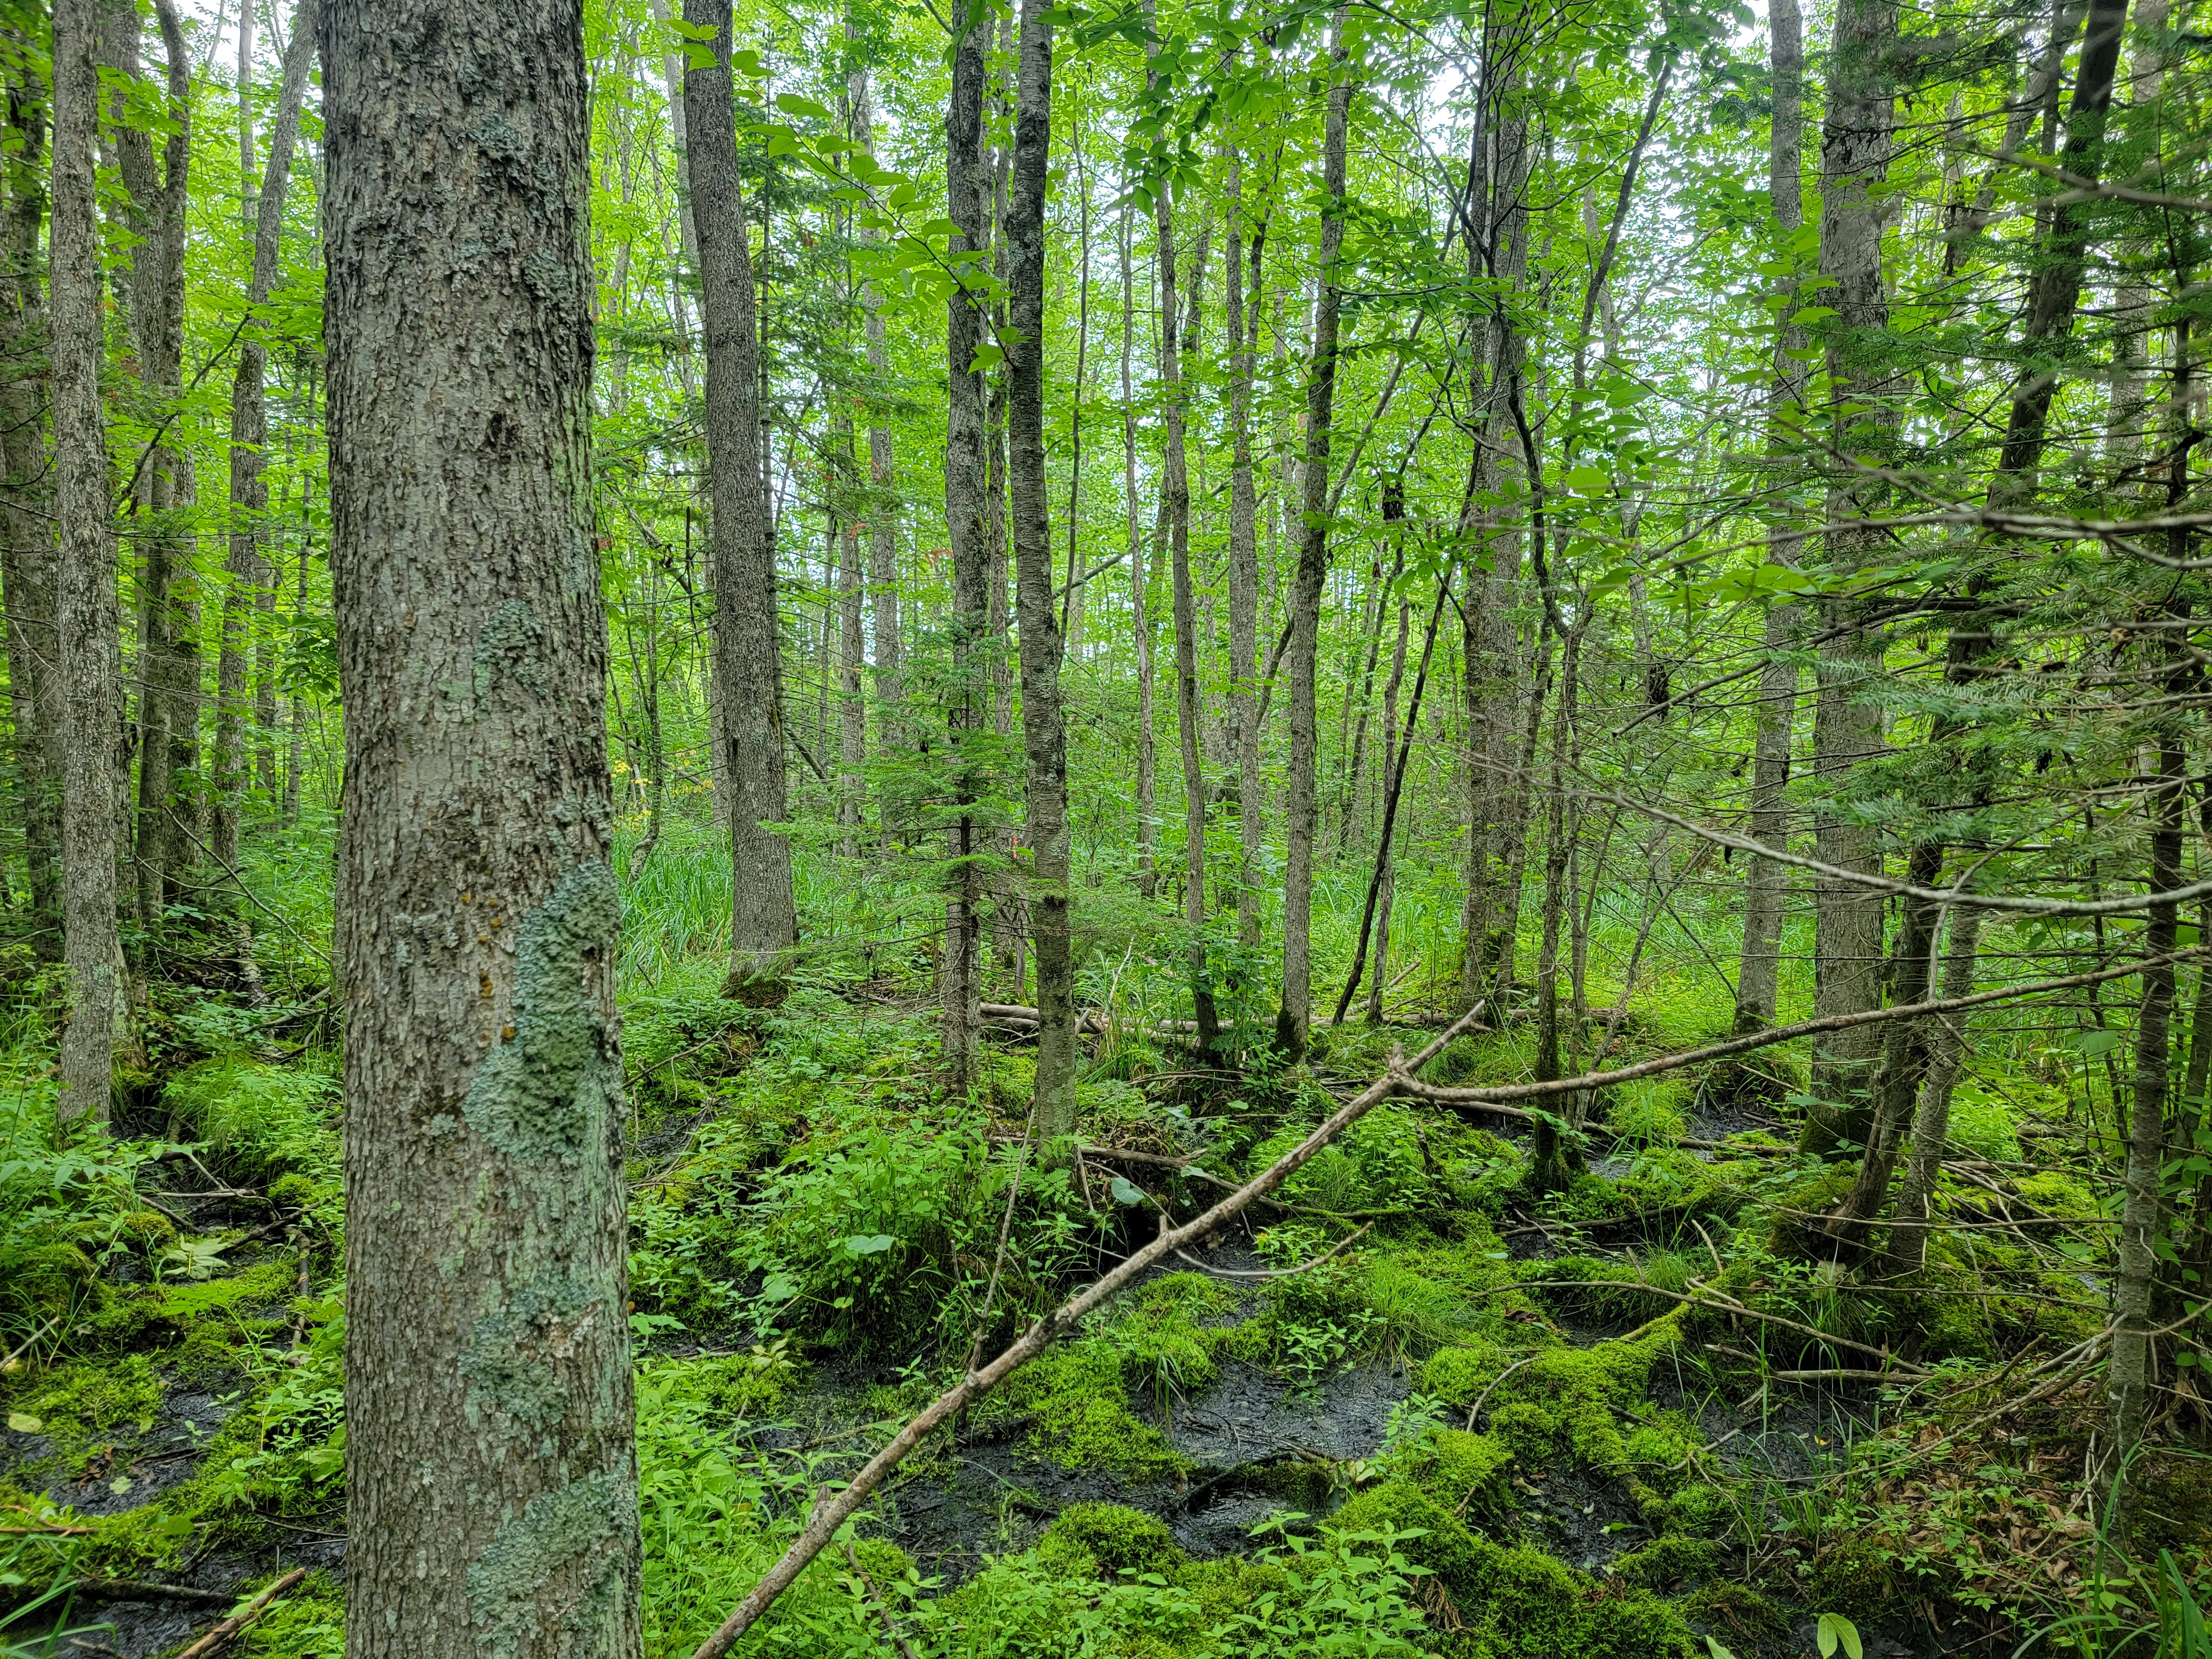 A black ash stand in a hydric forest, in which the soil is saturated by water. Photo courtesy of Patrick Engelken, USDA Forest Service.